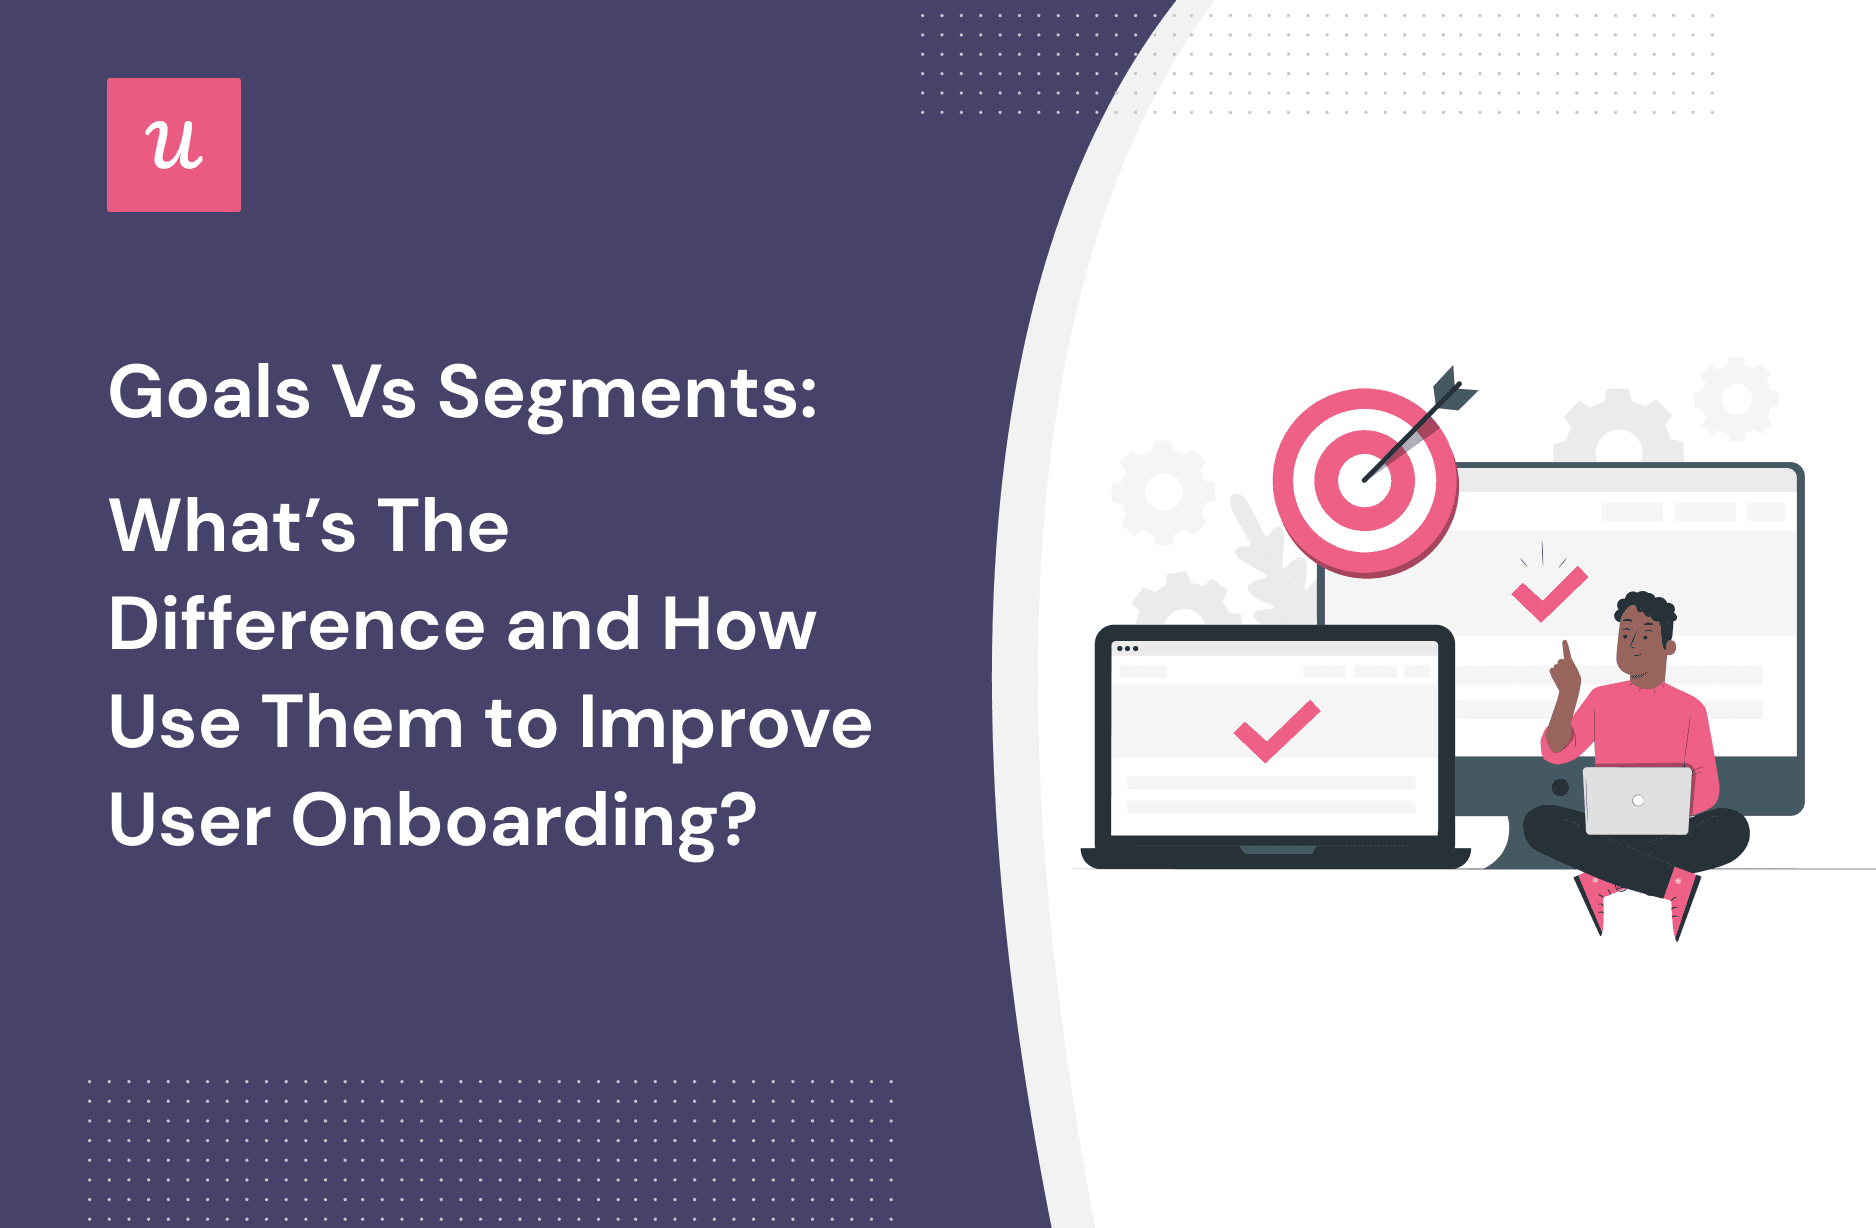 Goals vs Segments: What’s the Difference and How Use Them To Improve User Onboarding? cover